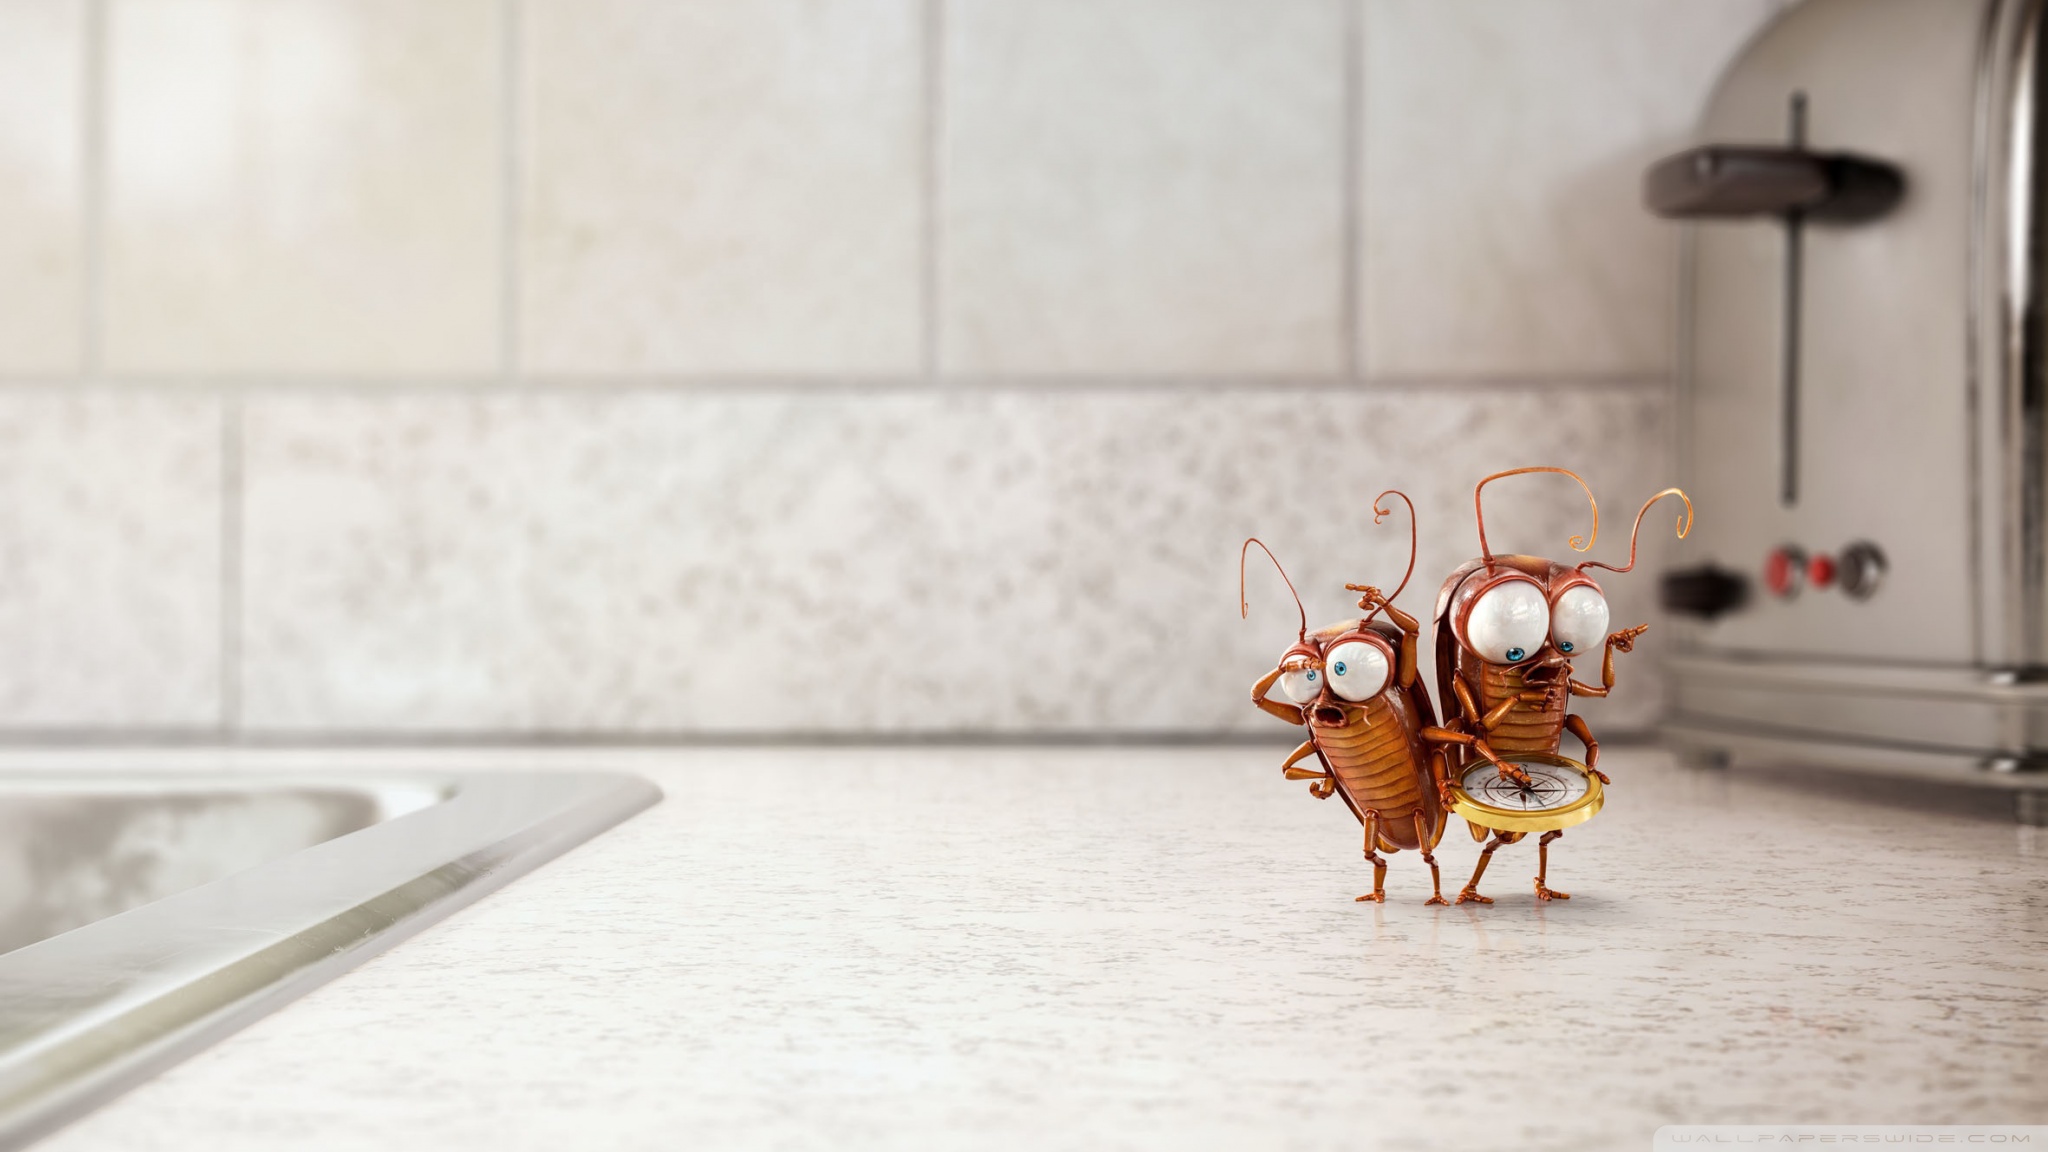 Download Funny Cute Cockroaches 3D UltraHD Free Wallpaper.